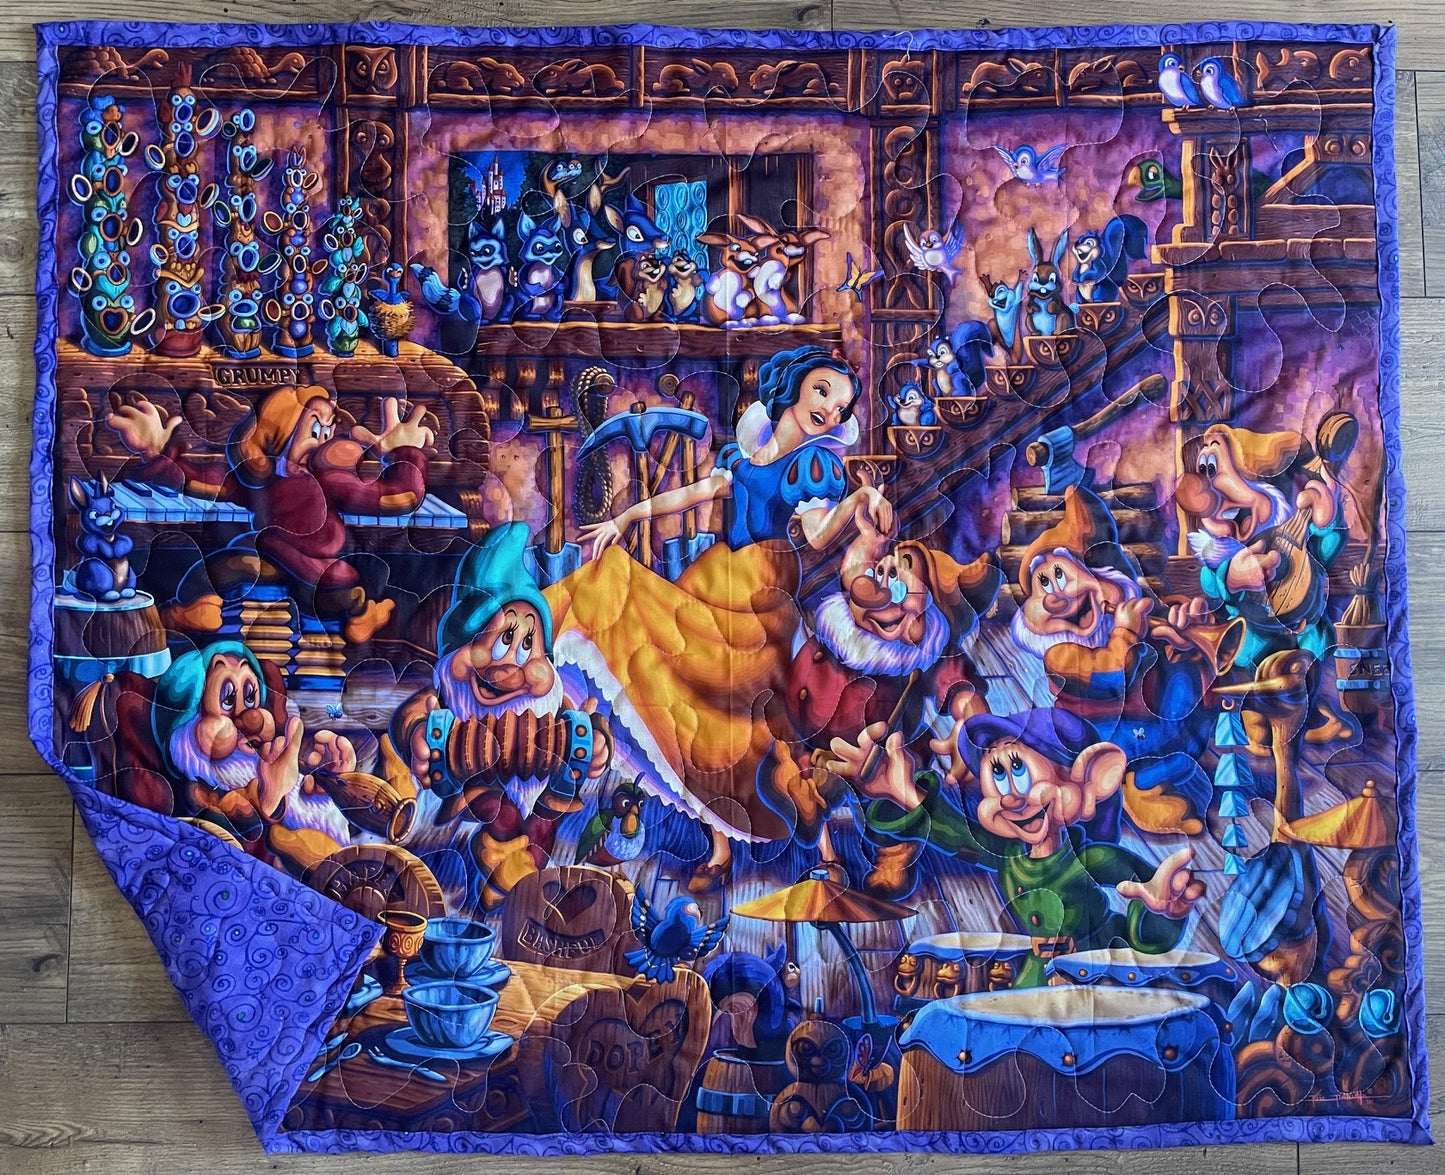 CLASSIC DISNEY SNOW WHITE & SEVEN DWARFS DANCING Inspired Quilted Blanket 36"x44" DIGITAL PRINTED FABRIC